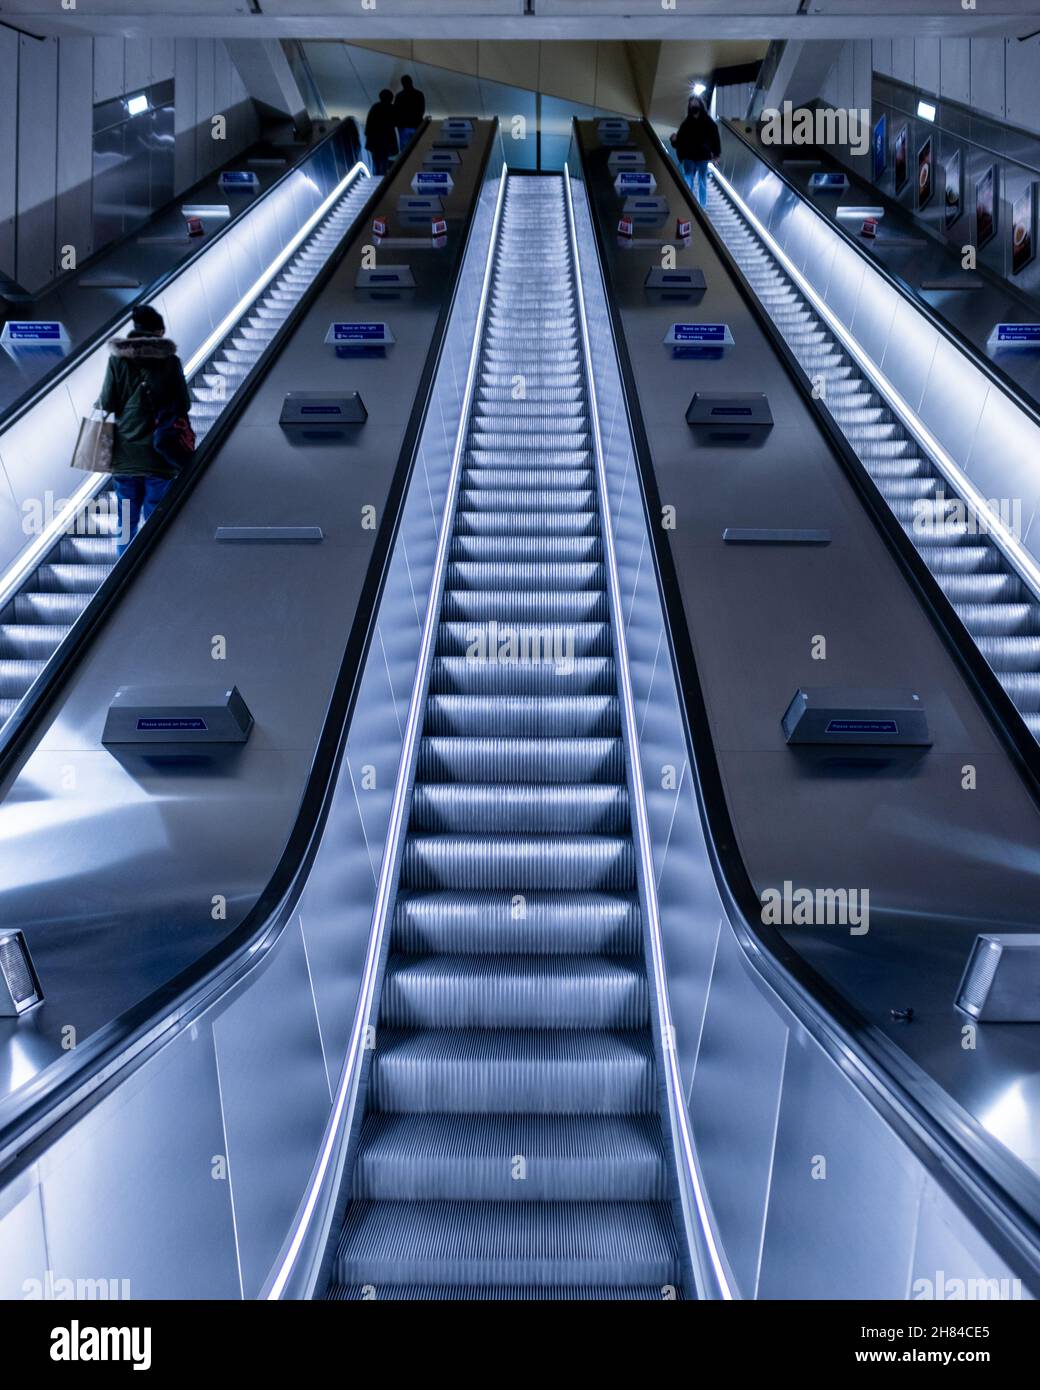 People travelling on the escalators at Battersea Power Station tube station on the London Underground network at night on the northern line extension Stock Photo